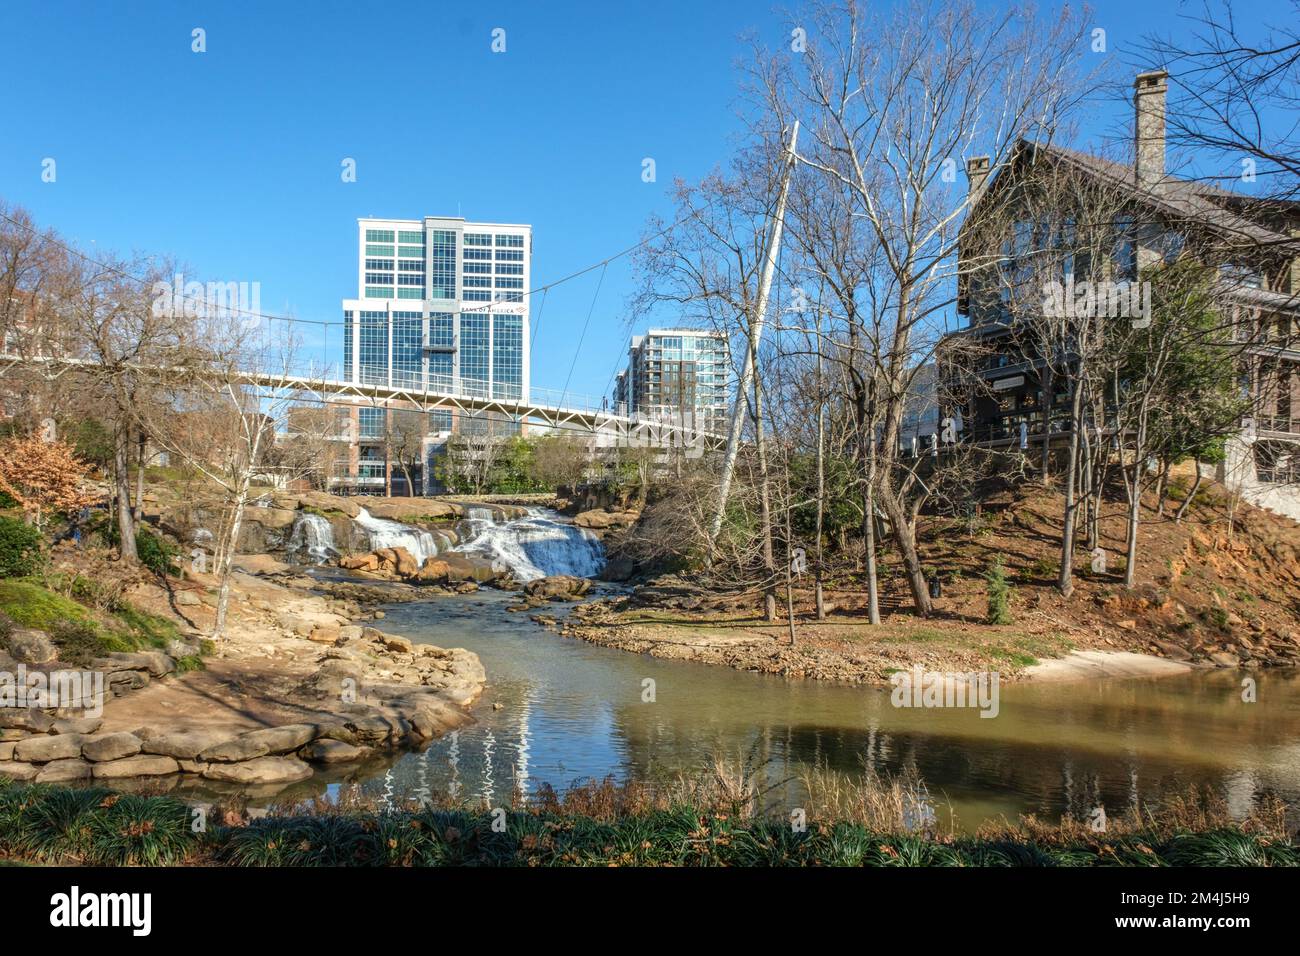 Falls Park on the Reedy view of the Liberty Bridge and downtown Greenville, South Carolina buildings. Stock Photo